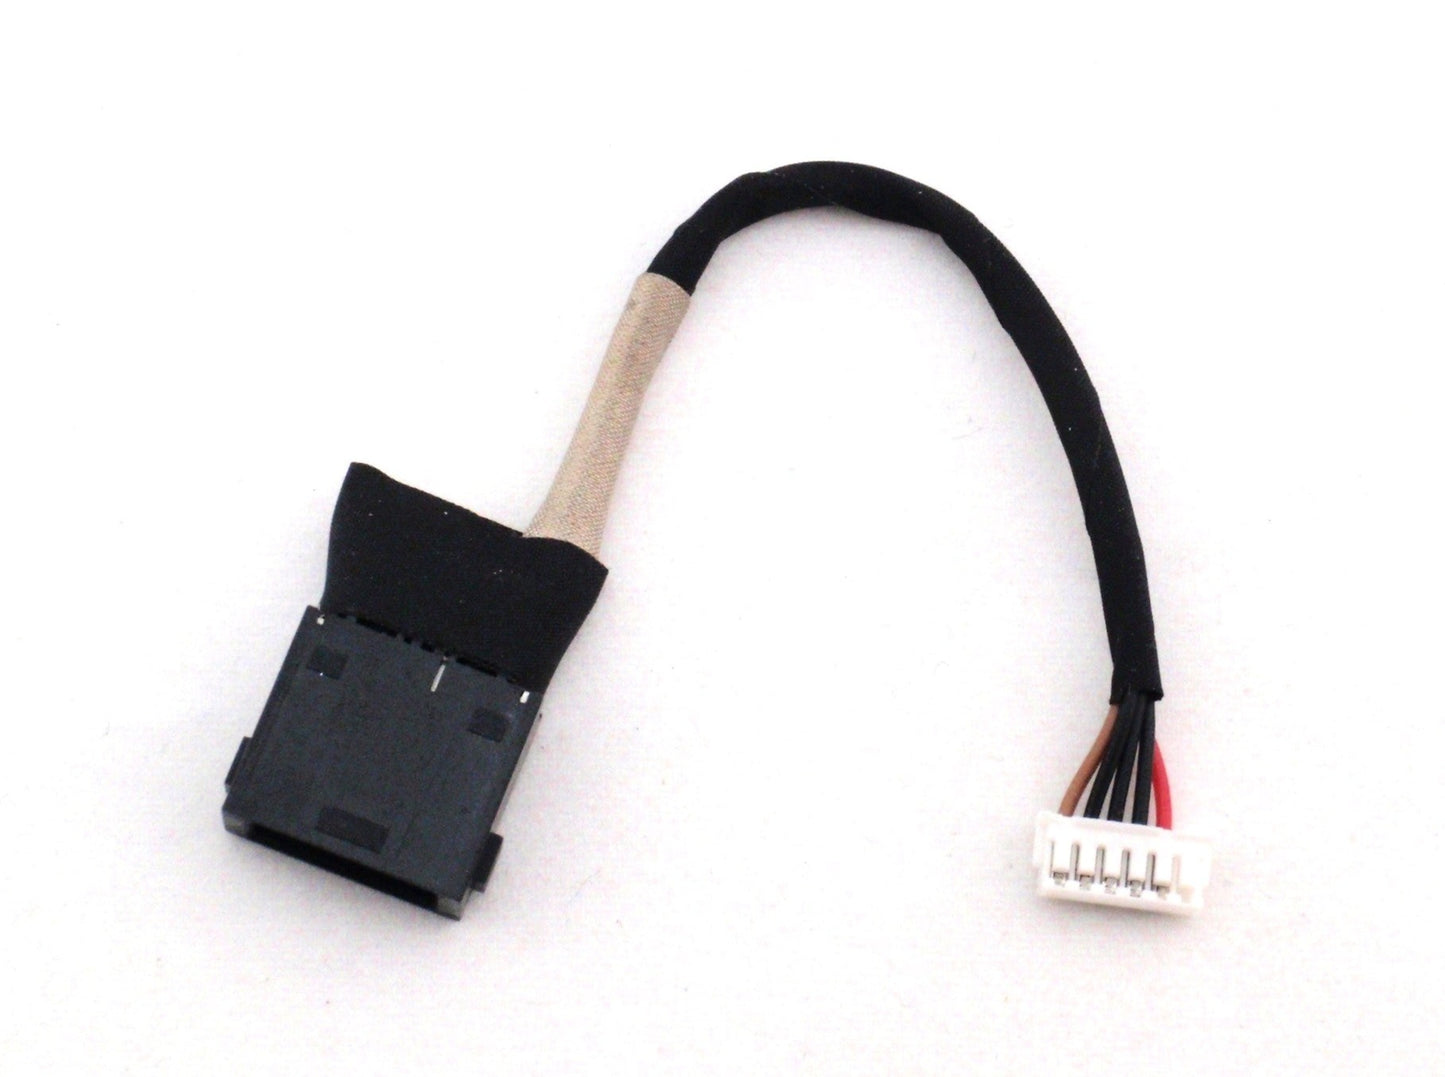 Lenovo New DC In Power Jack Charging Port Connector Socket Cable B490s B4400s M490s M4400s 50.4YG03.001 90202346